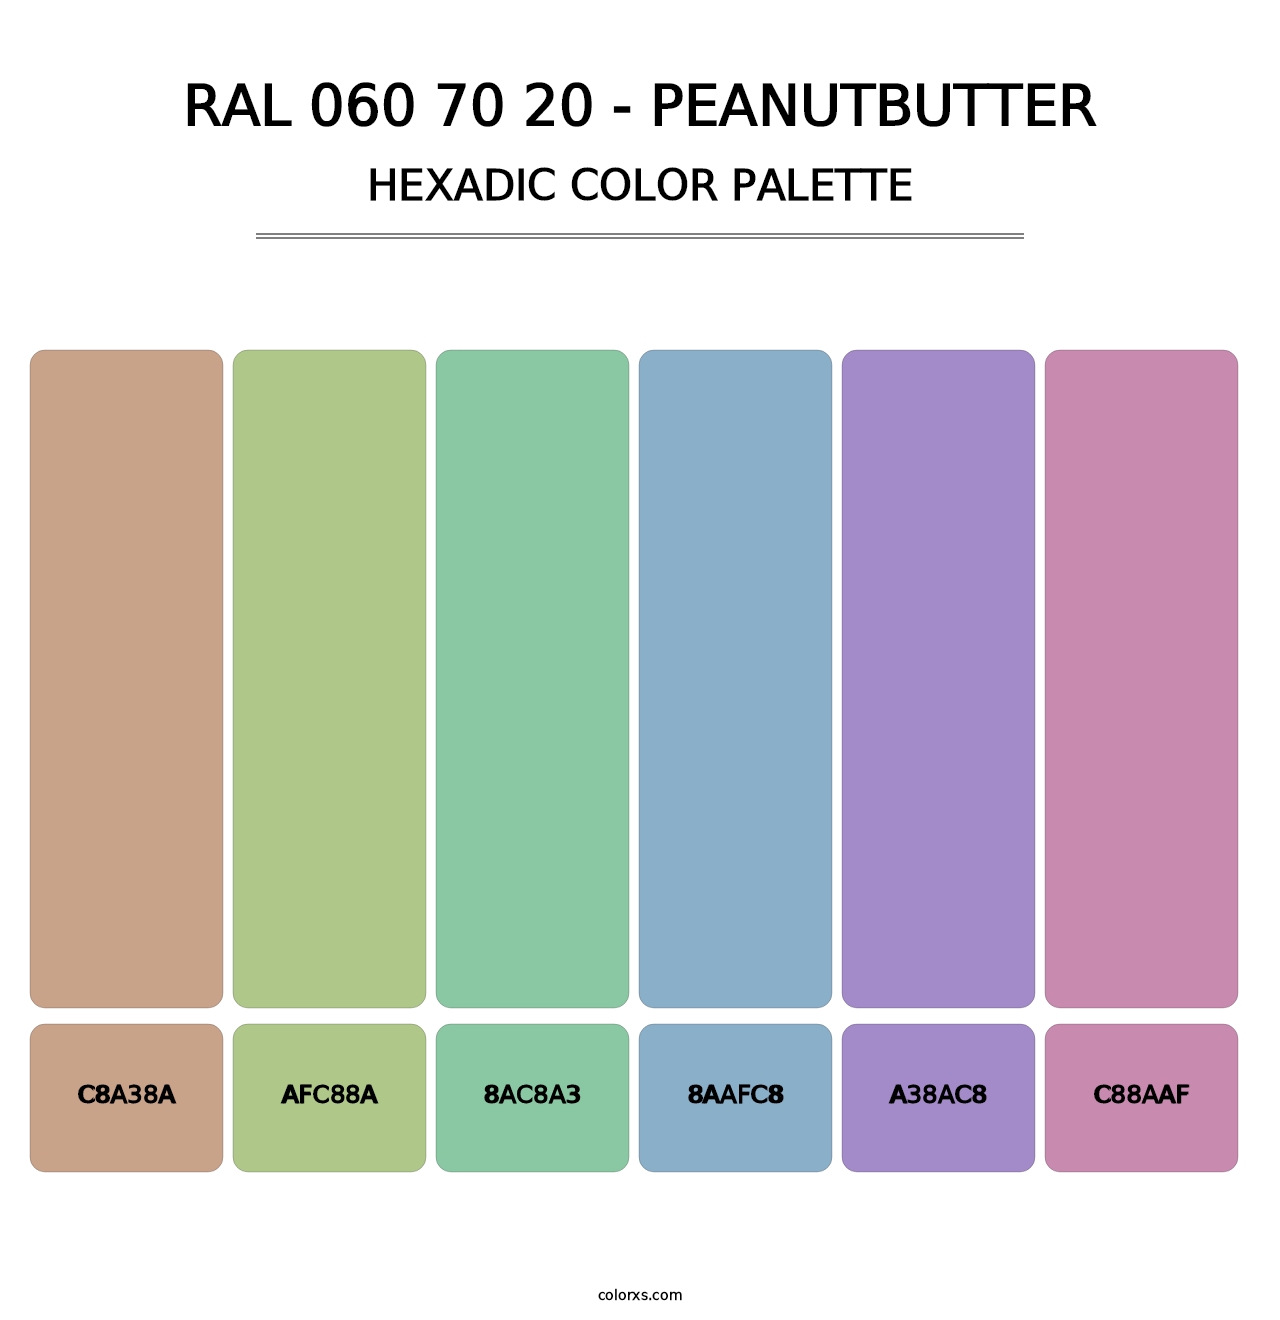 RAL 060 70 20 - Peanutbutter - Hexadic Color Palette